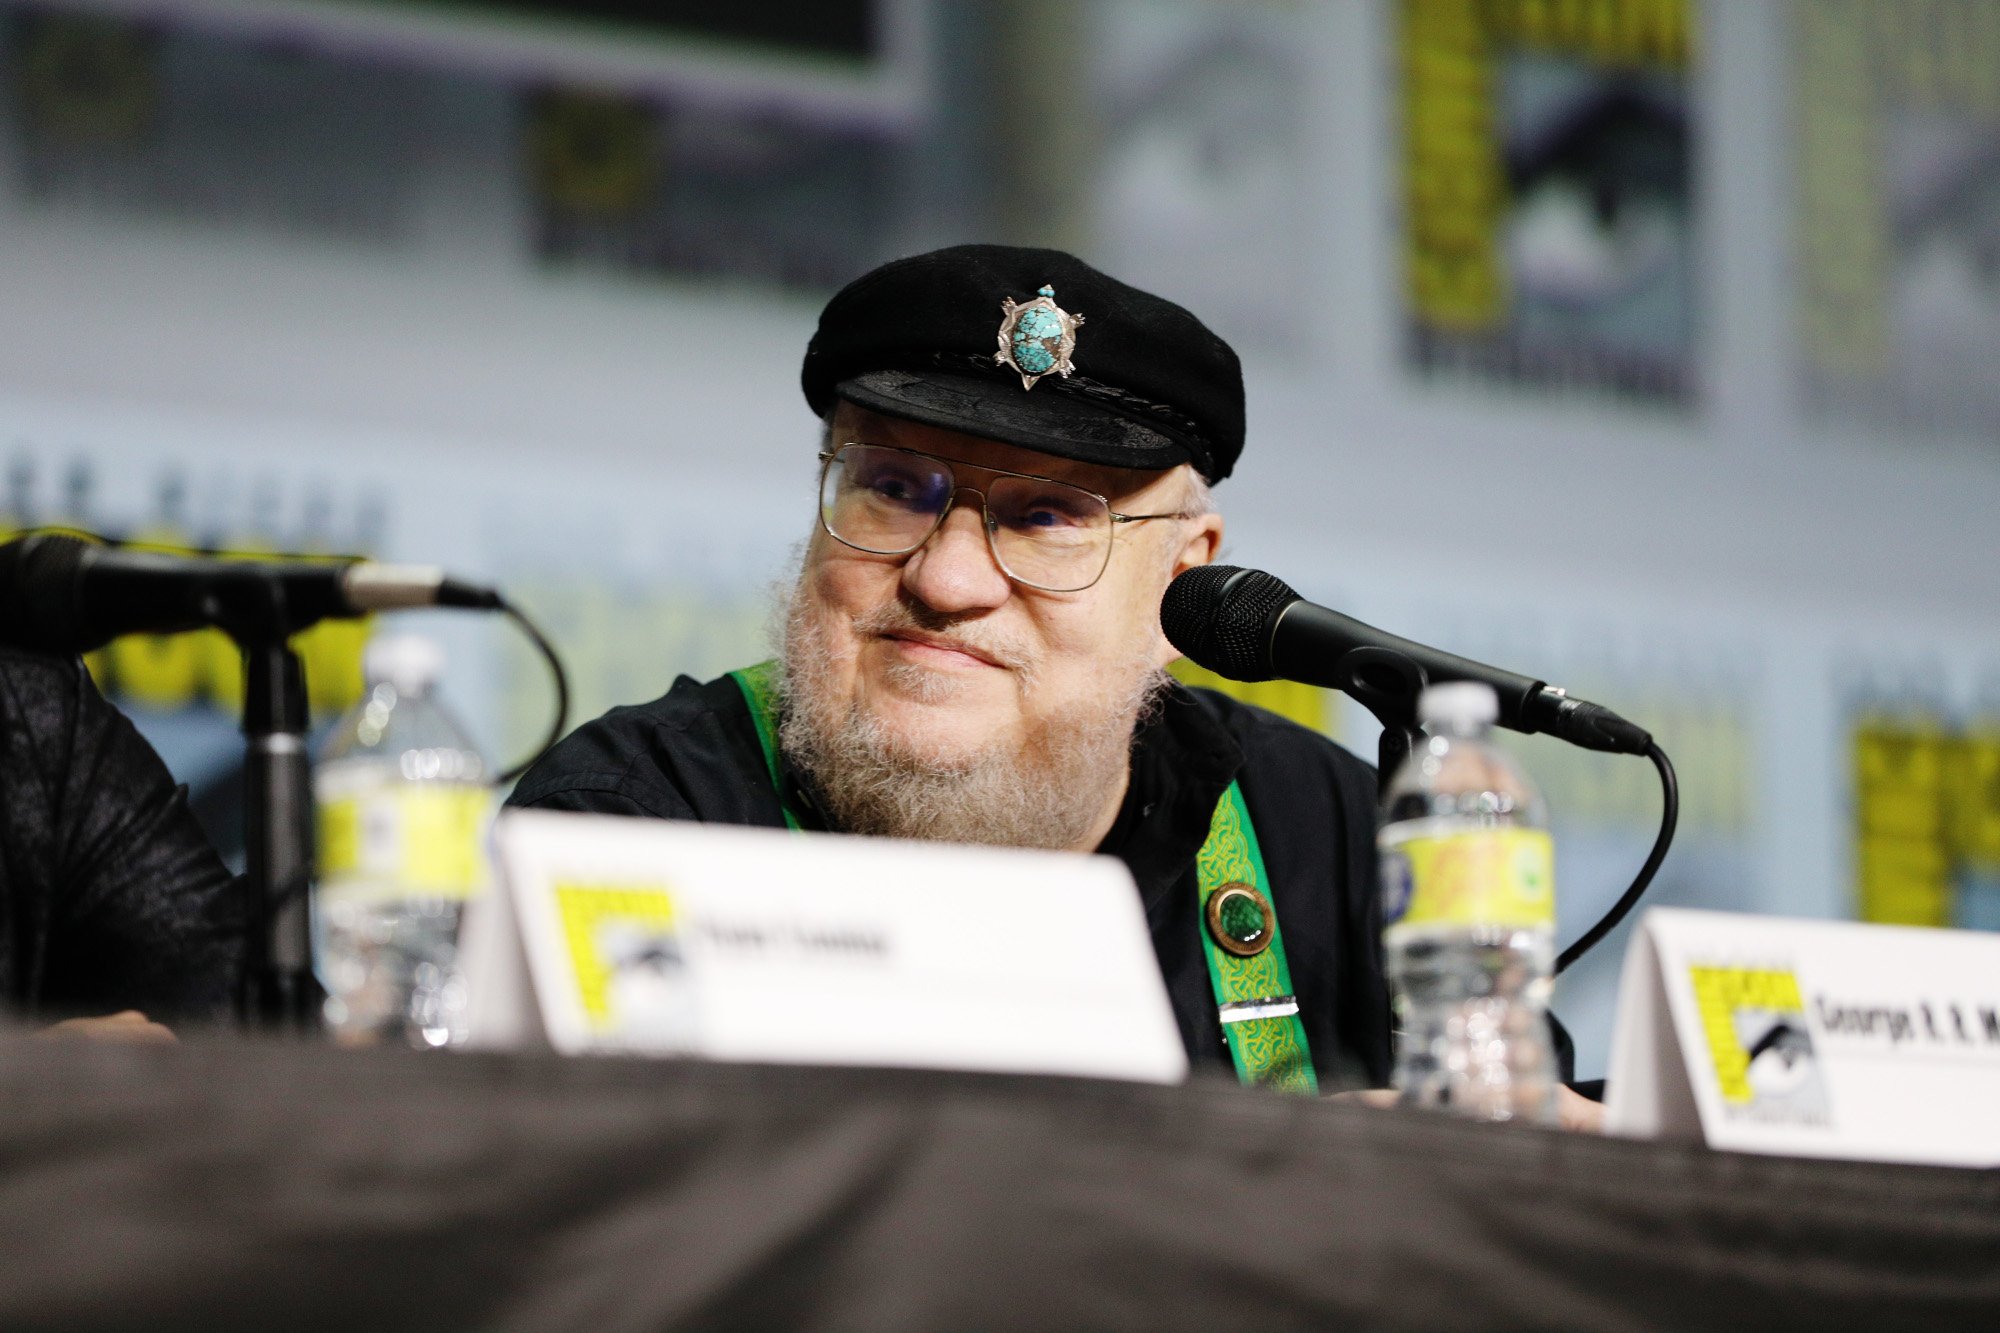 'Game of Thrones' author George R.R. Martin, who sent signed copies of 'Fire & Blood' to the 'House of the Dragon' cast. In the photo, he's sitting down at a Comic-Con panel and wearing a hat. There's a microphone on the table in front of him.